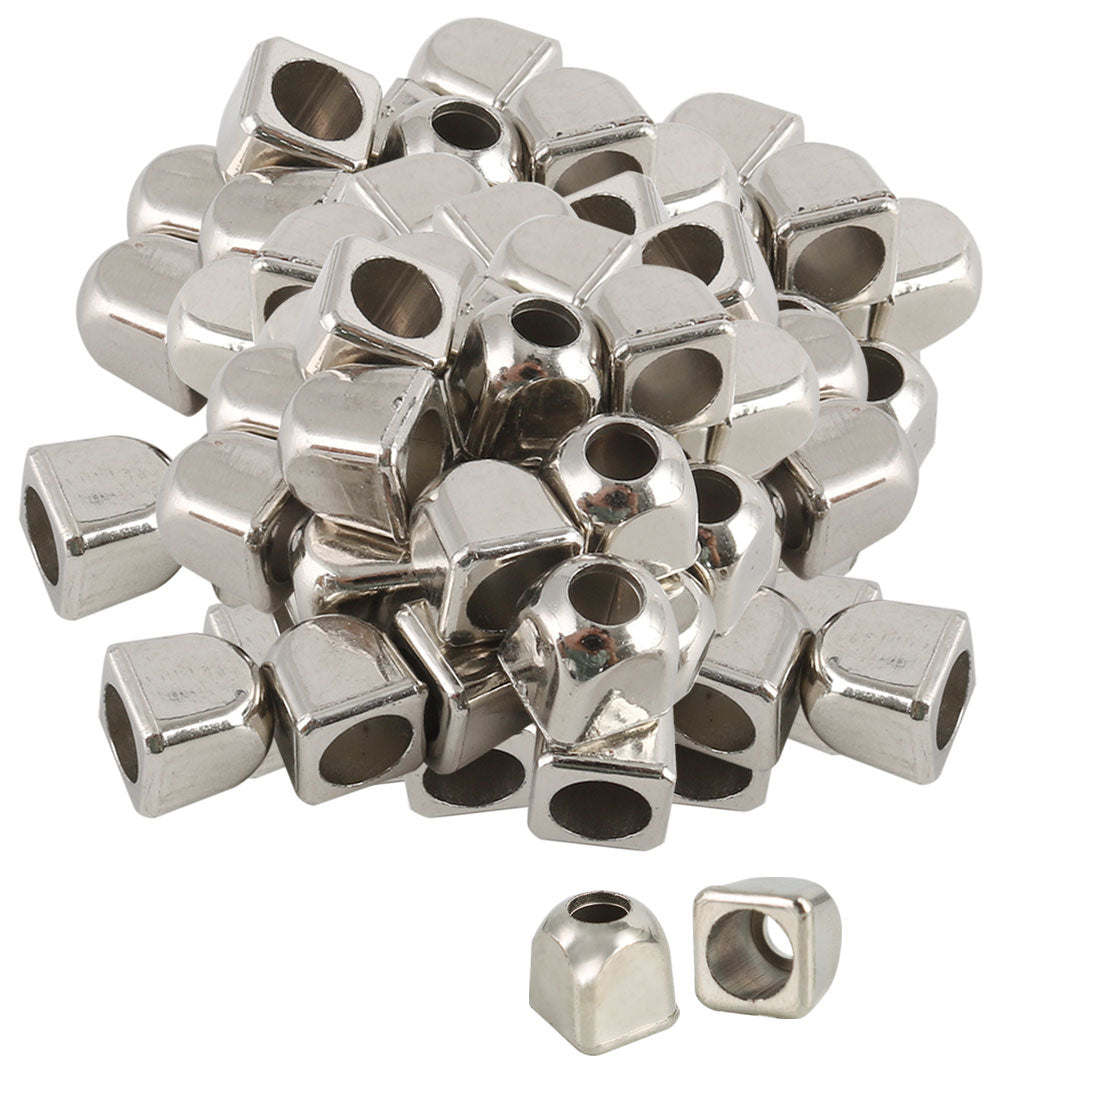 uxcell Uxcell 100pcs Plastic Bell End Stopper Square Lace Lock Rope Fastener Silver Tone